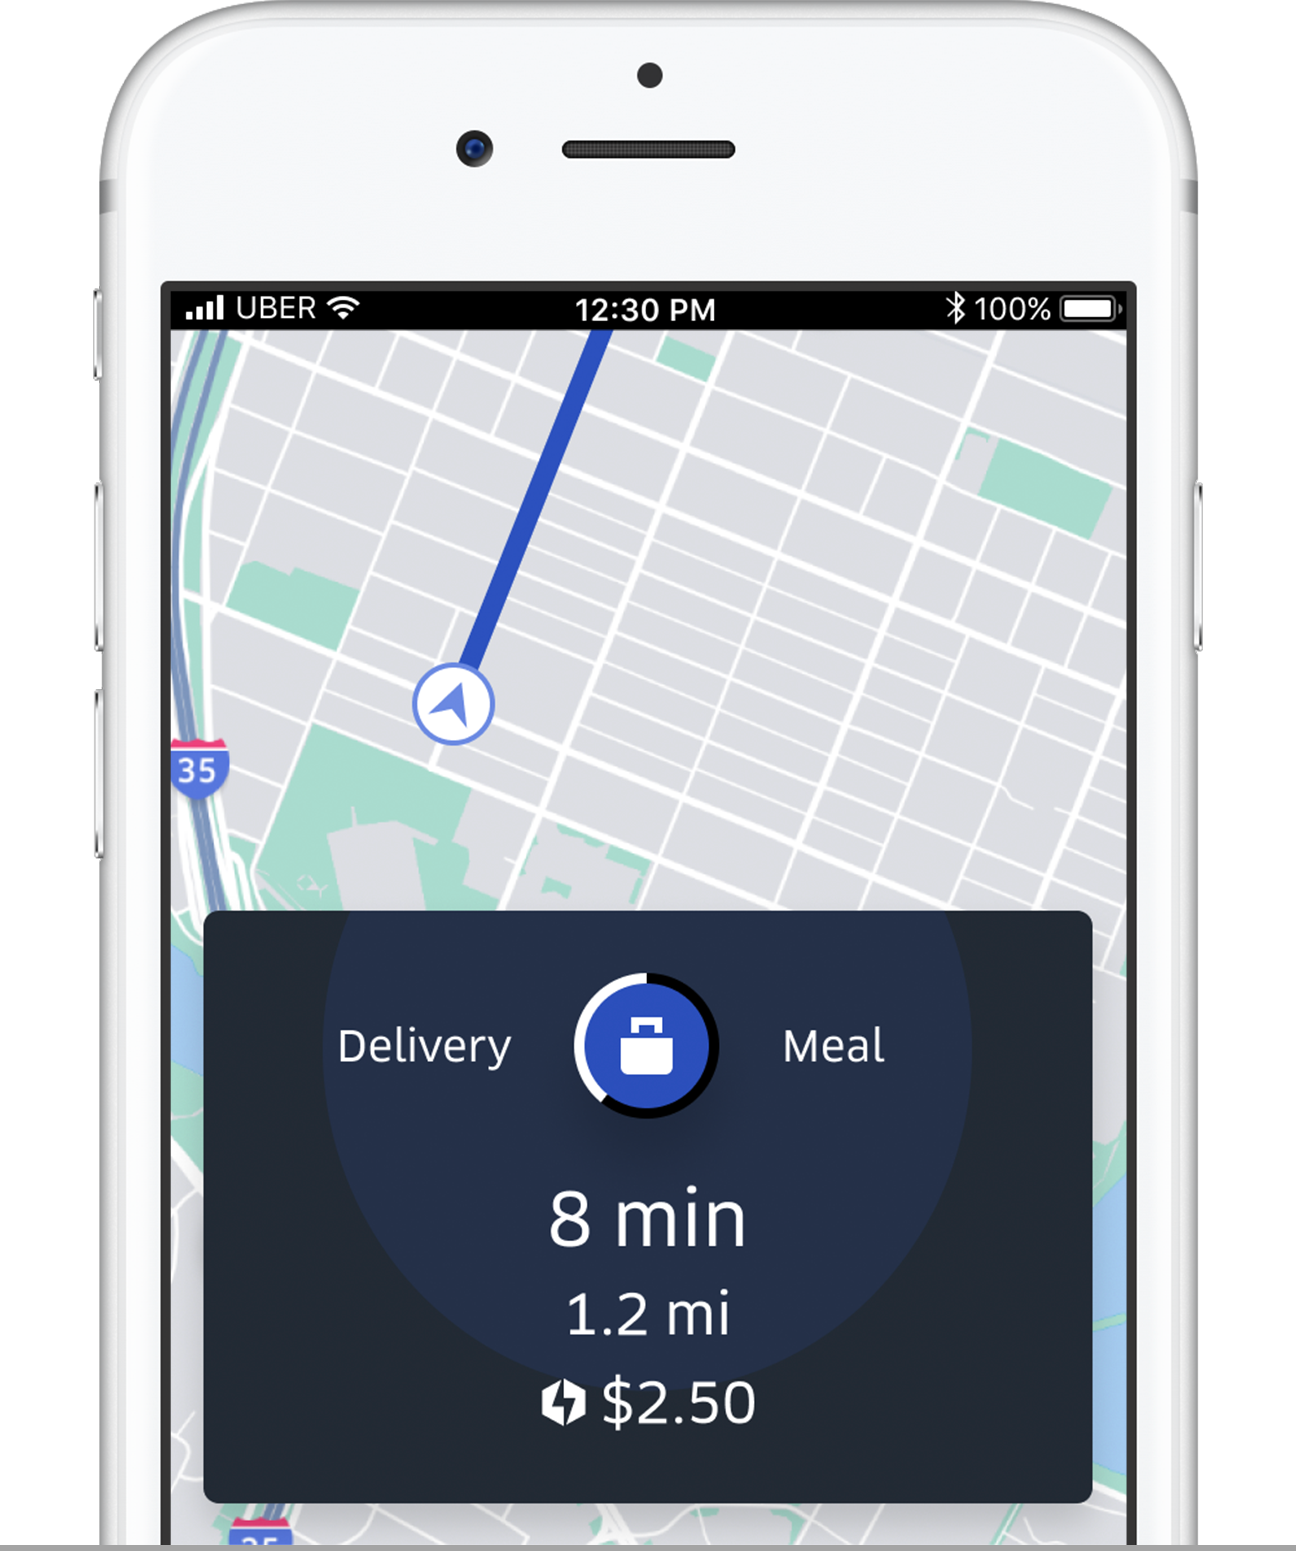 Surge: Couriers can more money when it's busy | Uber Blog